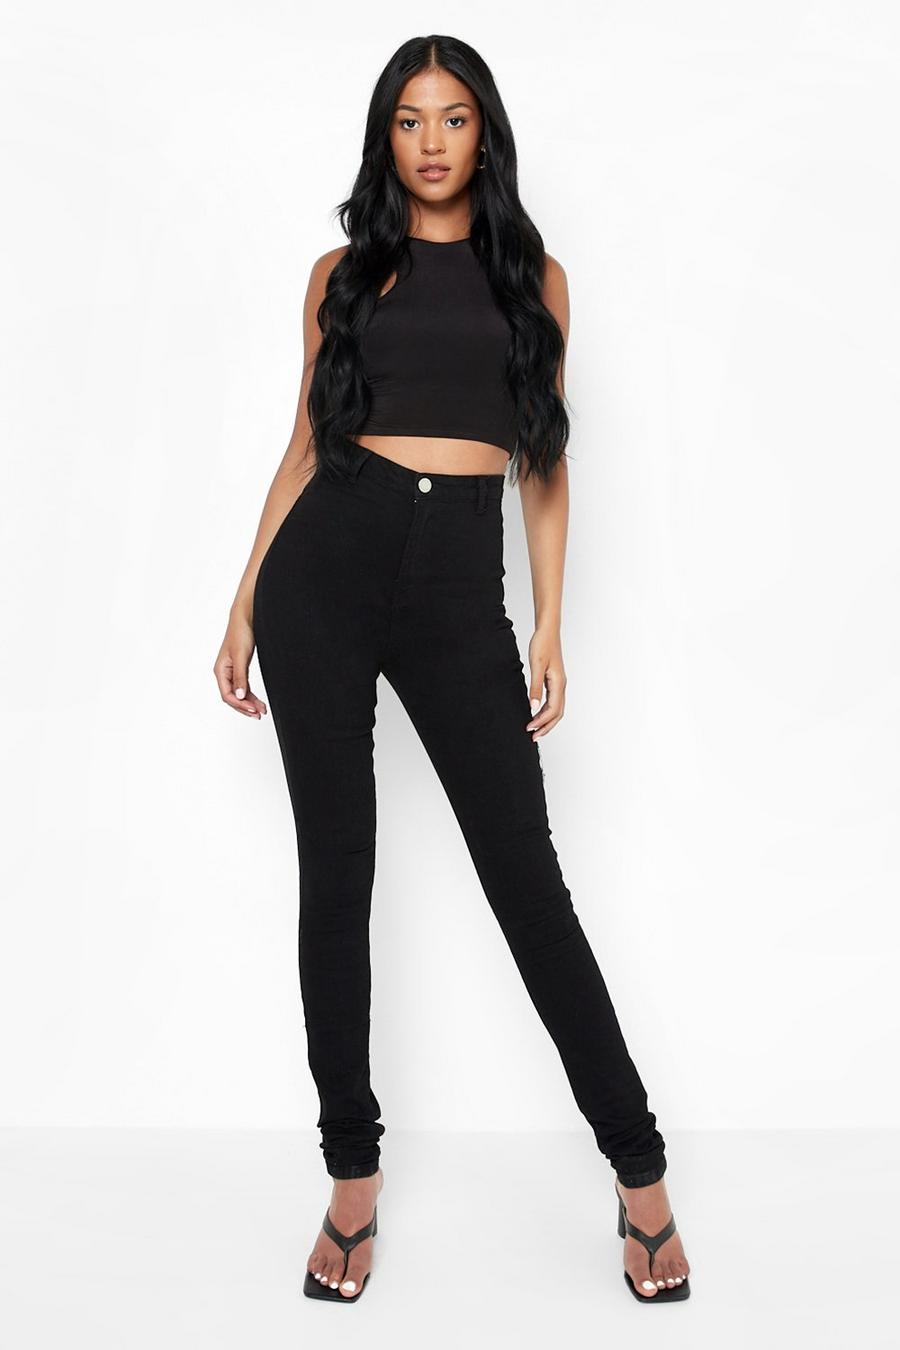 Black Jeans, High Waisted Jeans